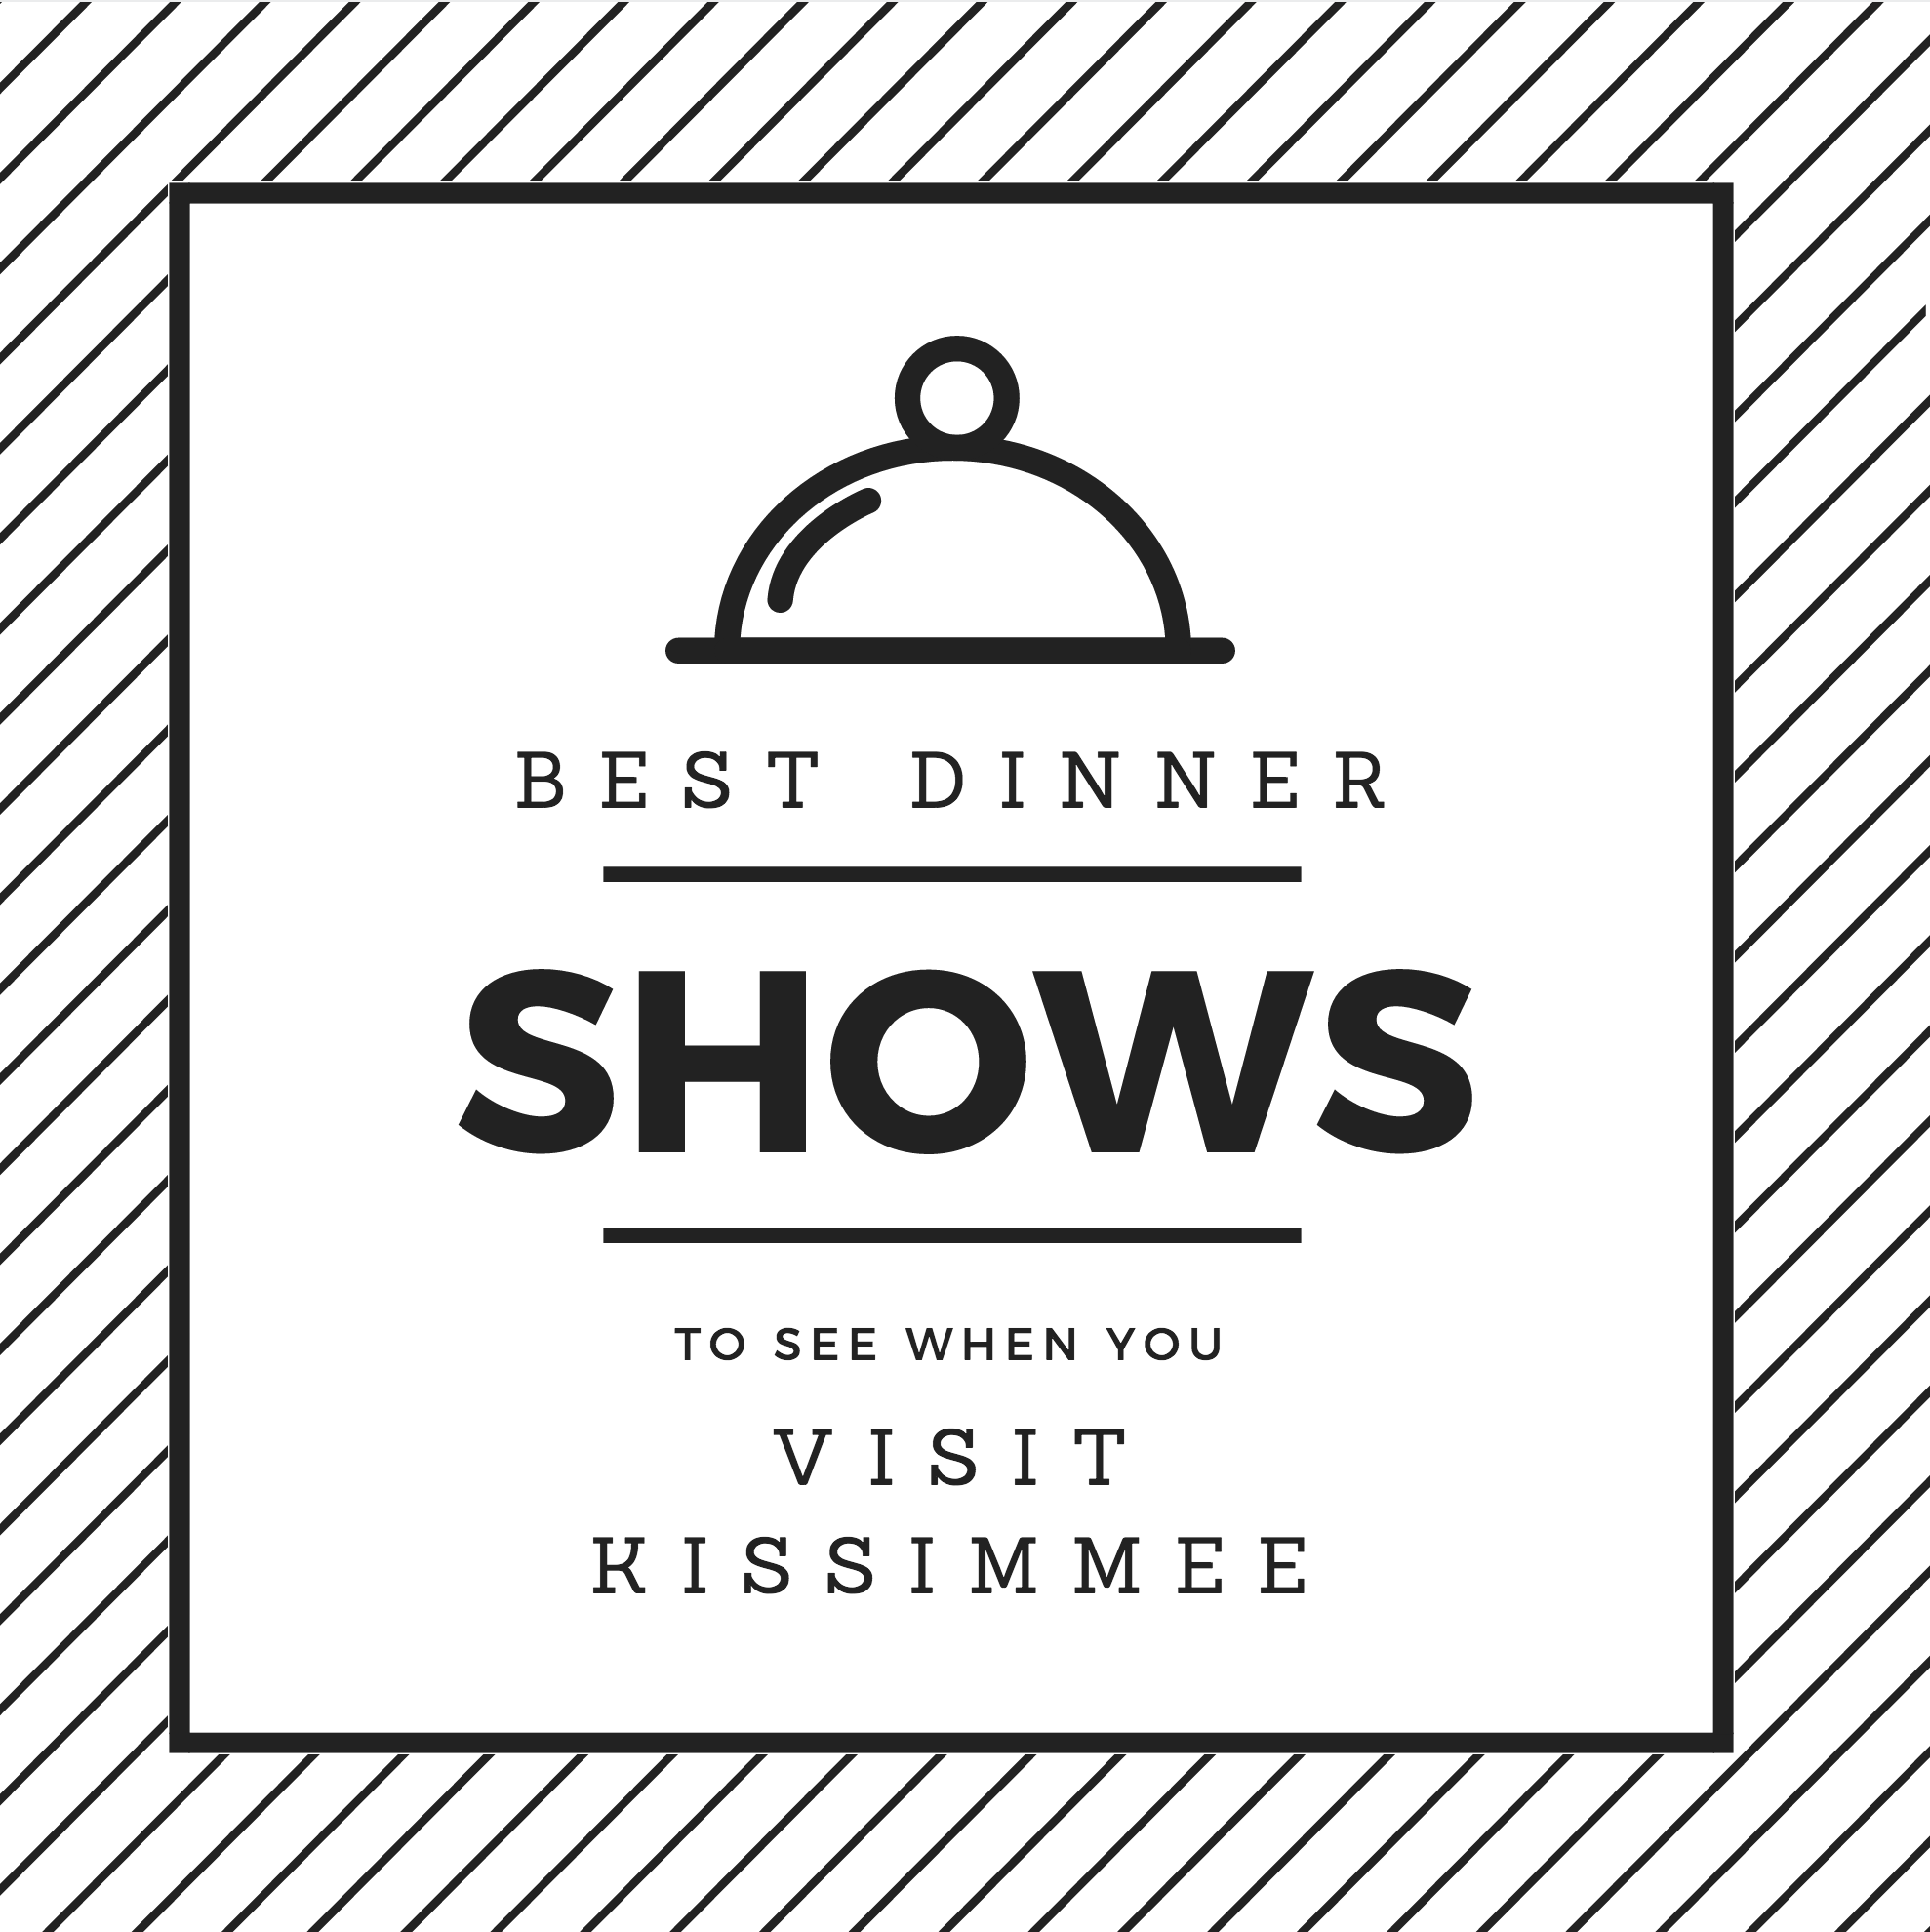 A black and white image with a white box, and in it says "Best Dinner - Shows - To see when you visit Kissimmee"